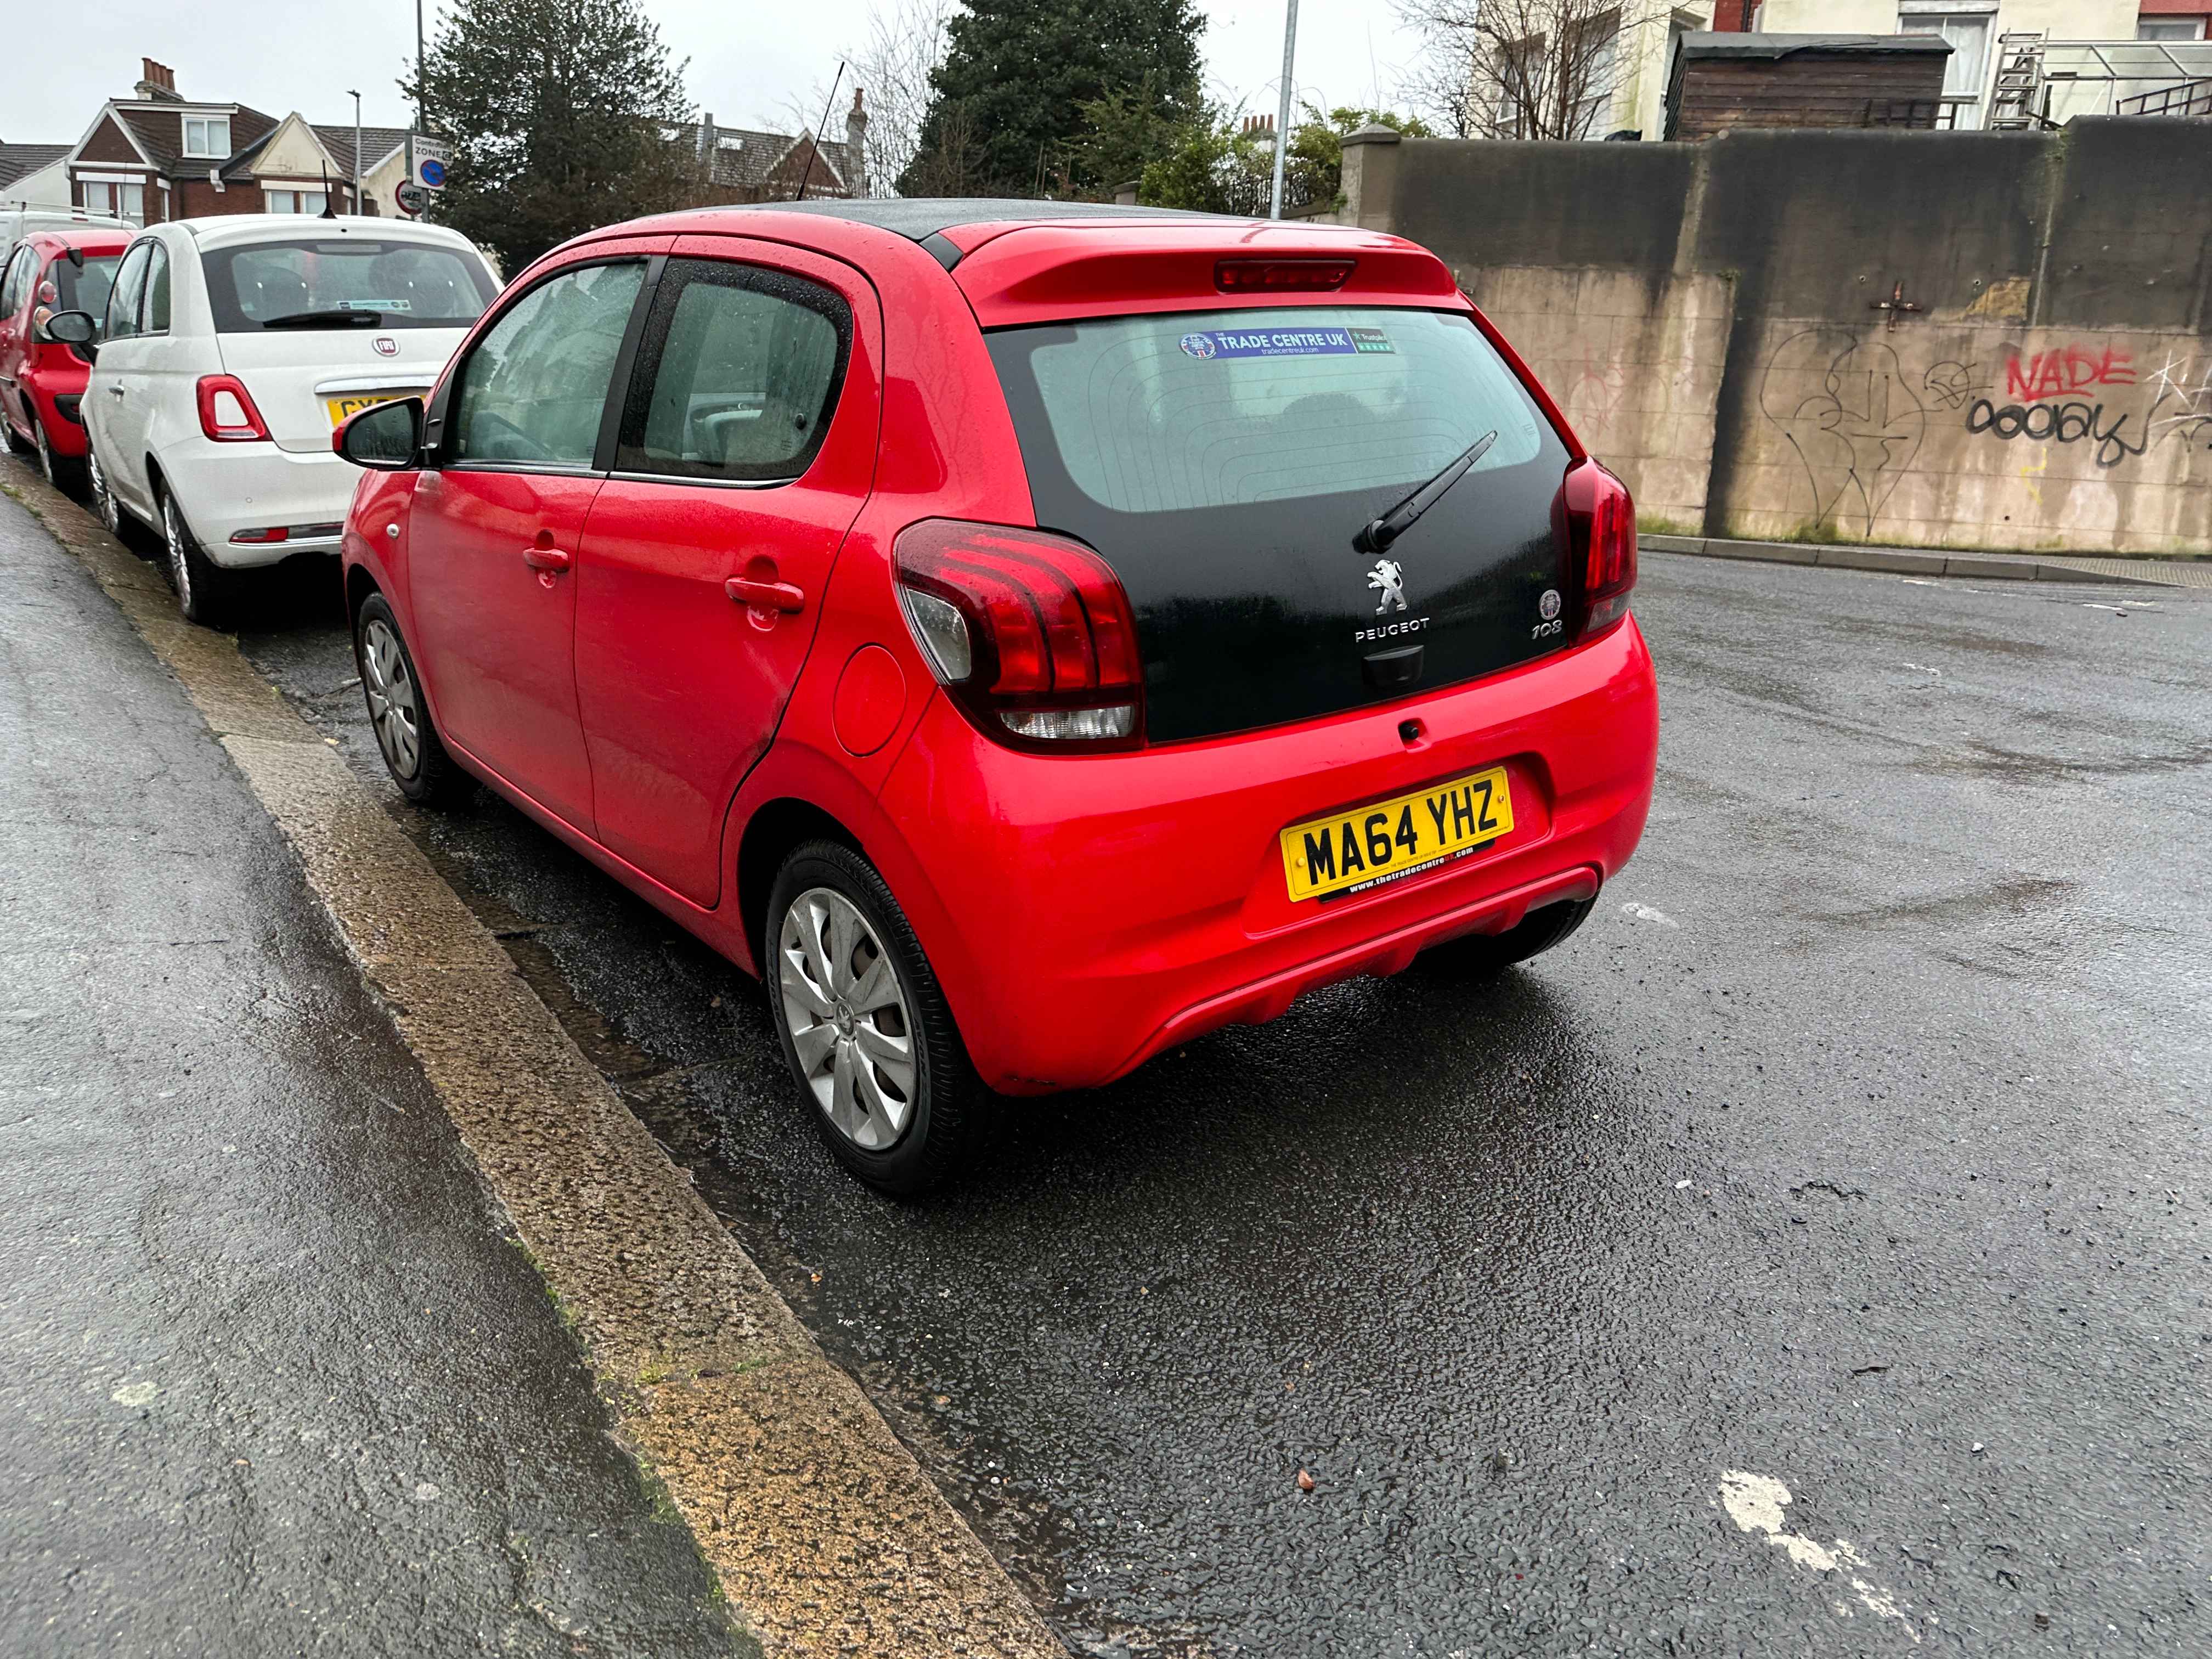 Photograph of MA64 YHZ - a Red Peugeot 108 parked in Hollingdean by a non-resident who uses the local area as part of their Brighton commute. The fourth of four photographs supplied by the residents of Hollingdean.